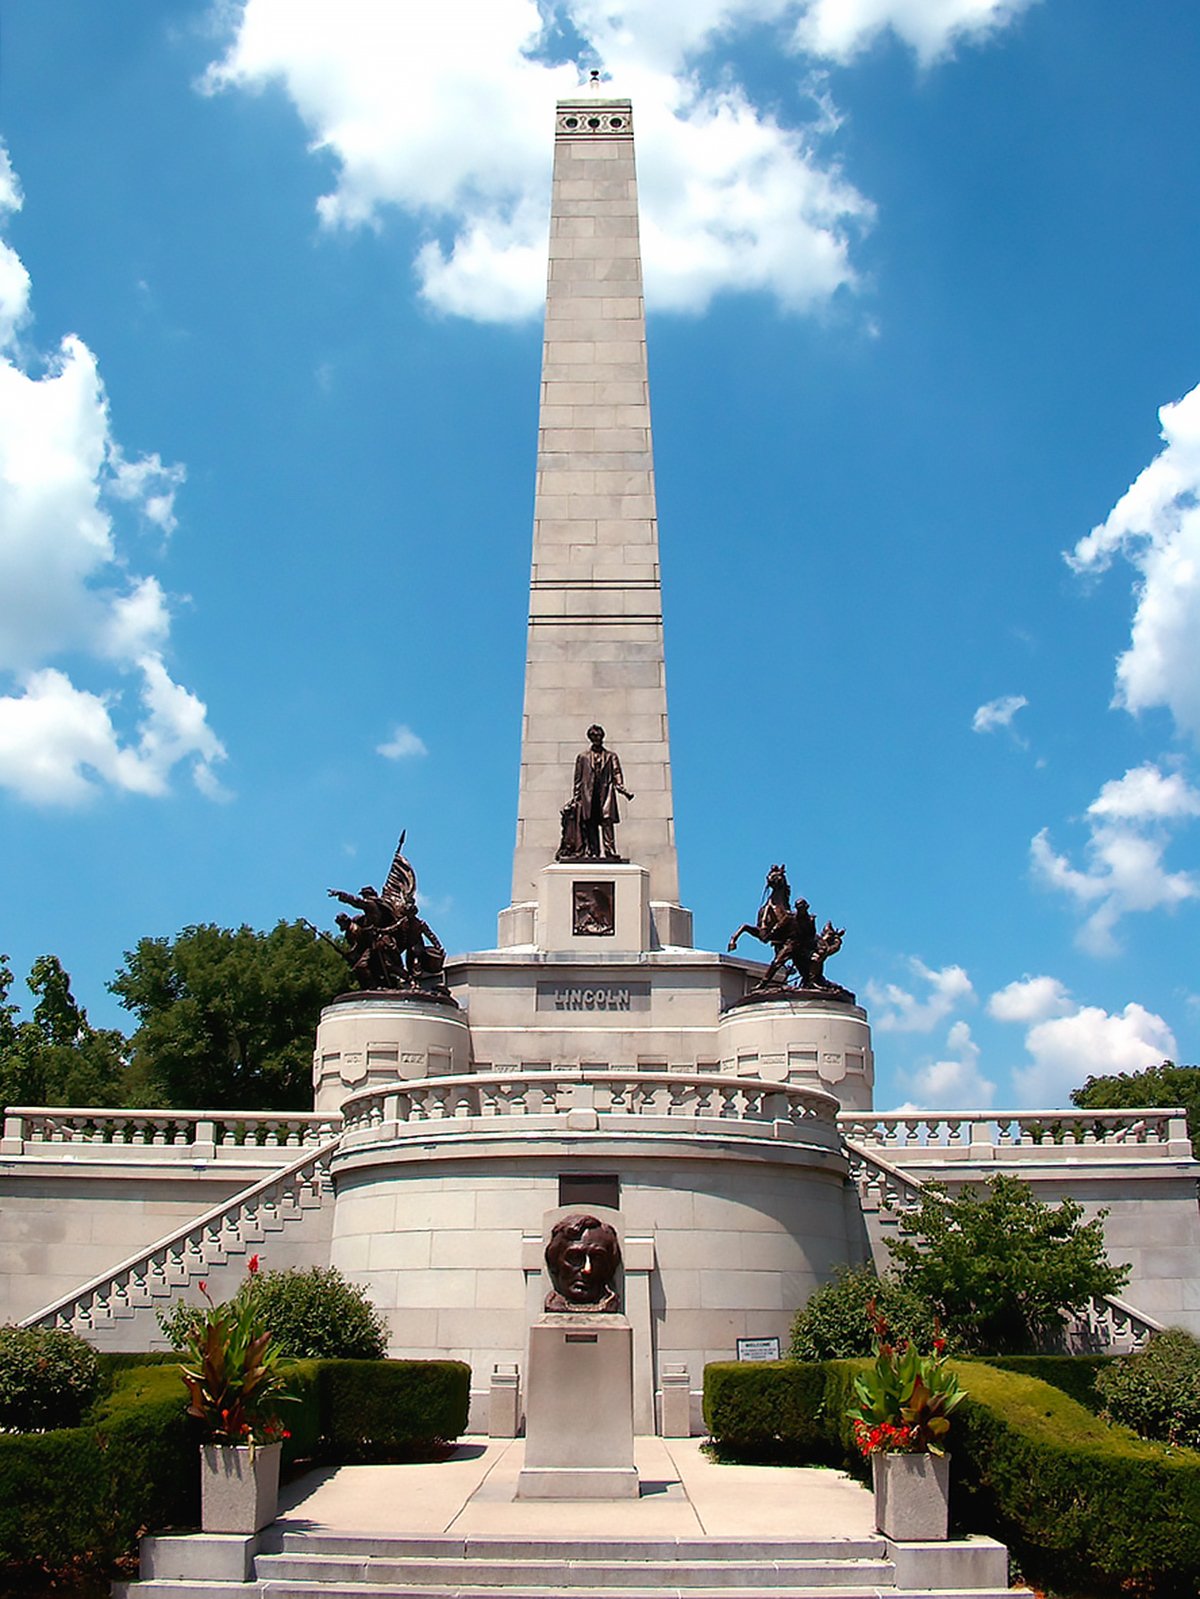 This is an image of the Abraham Lincoln Tomb in Springfield, Illinois. The towering monument, topped by an obelisk, is surrounded by several bronze statues, with a bust of Lincoln placed prominently at the front. Stairs lead up to the structure set against a backdrop of a clear blue sky with a few scattered clouds. The monument serves as a memorial to the 16th President of the United States.